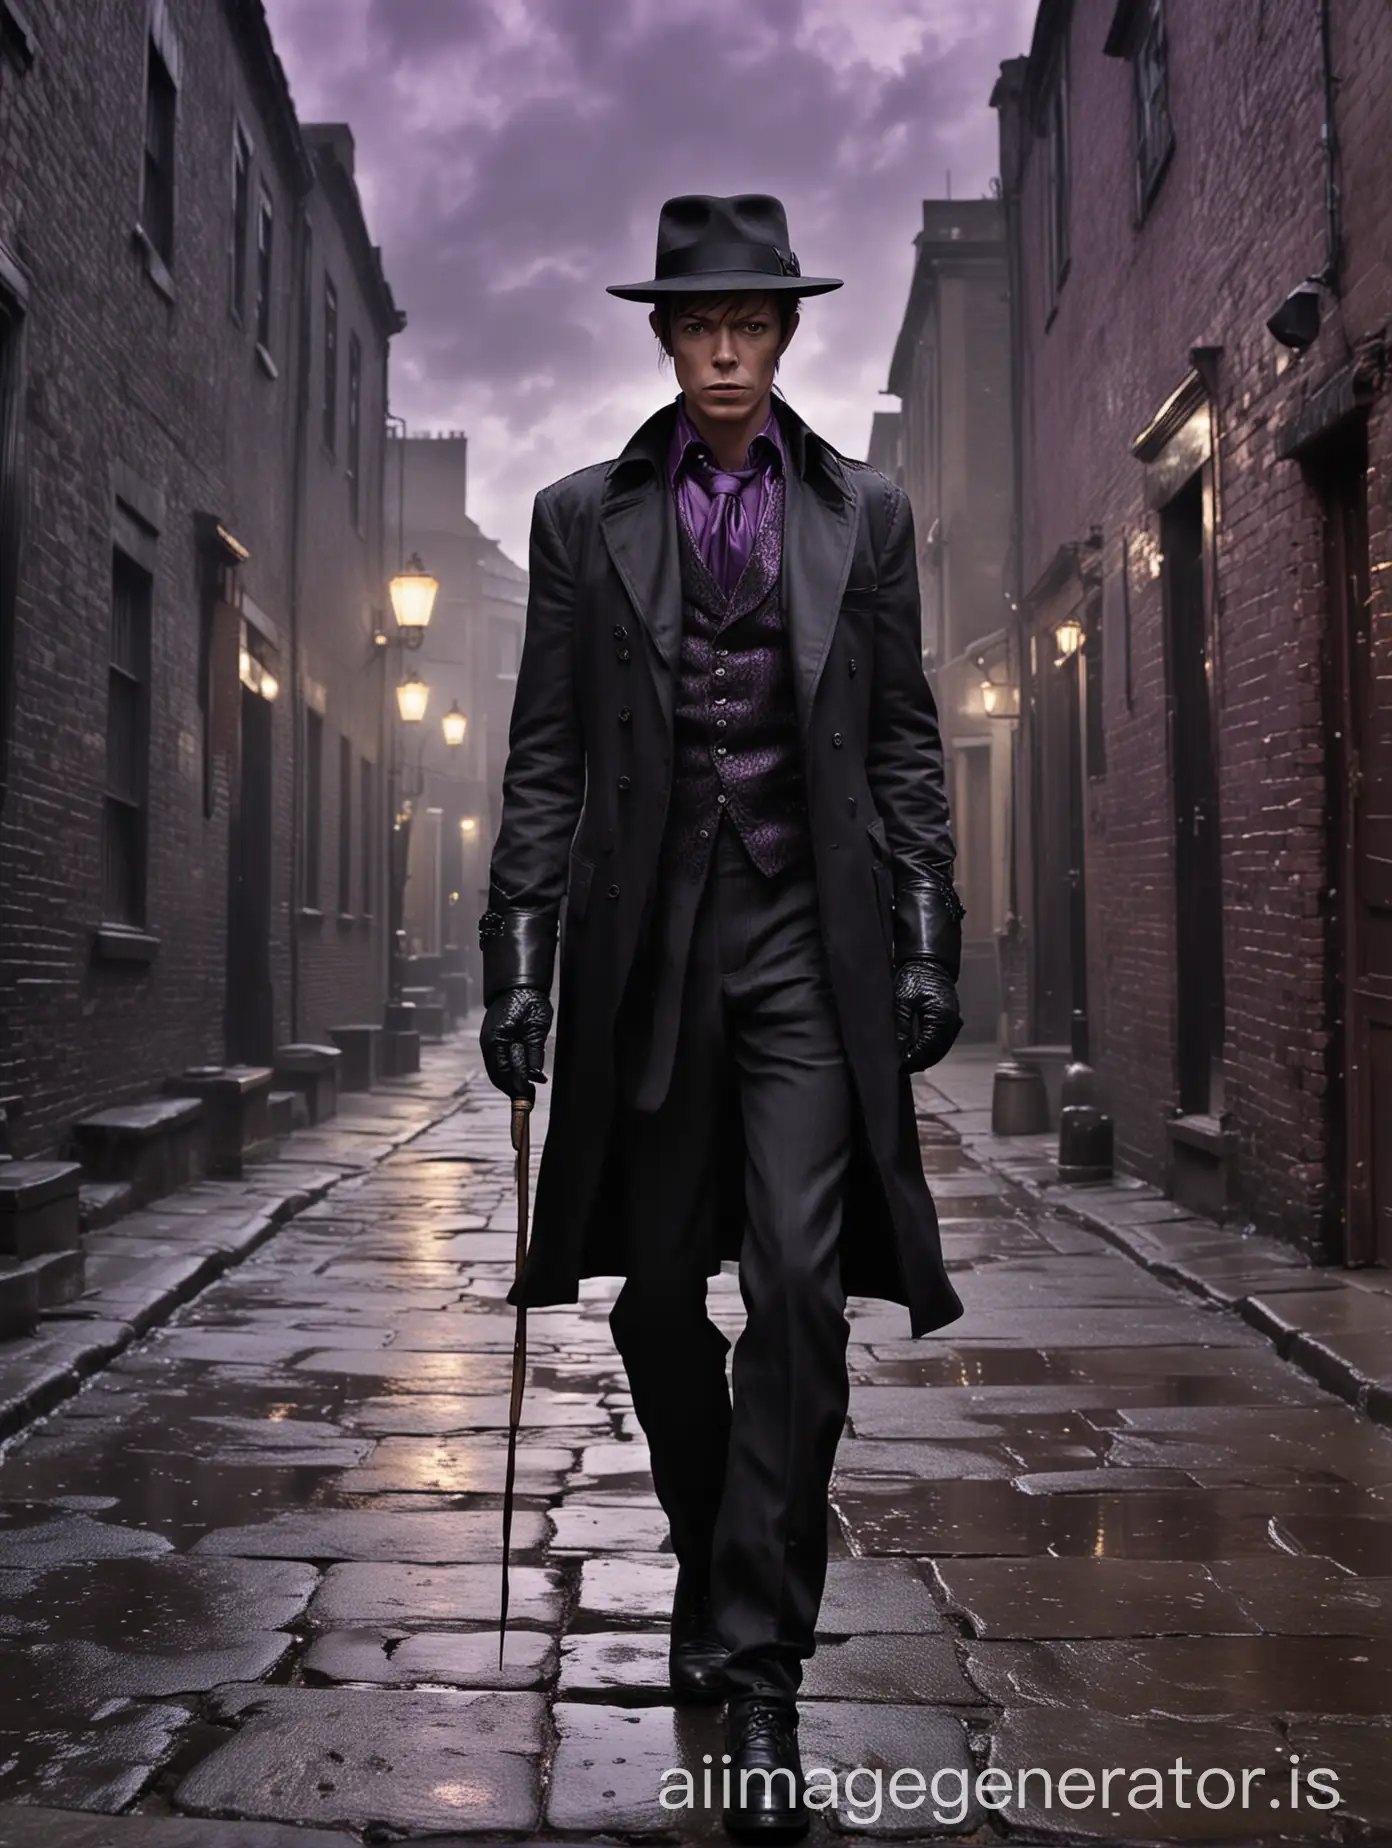 Young-David-Bowie-Walking-in-Noir-Cityscape-with-Dramatic-Stormy-Sky